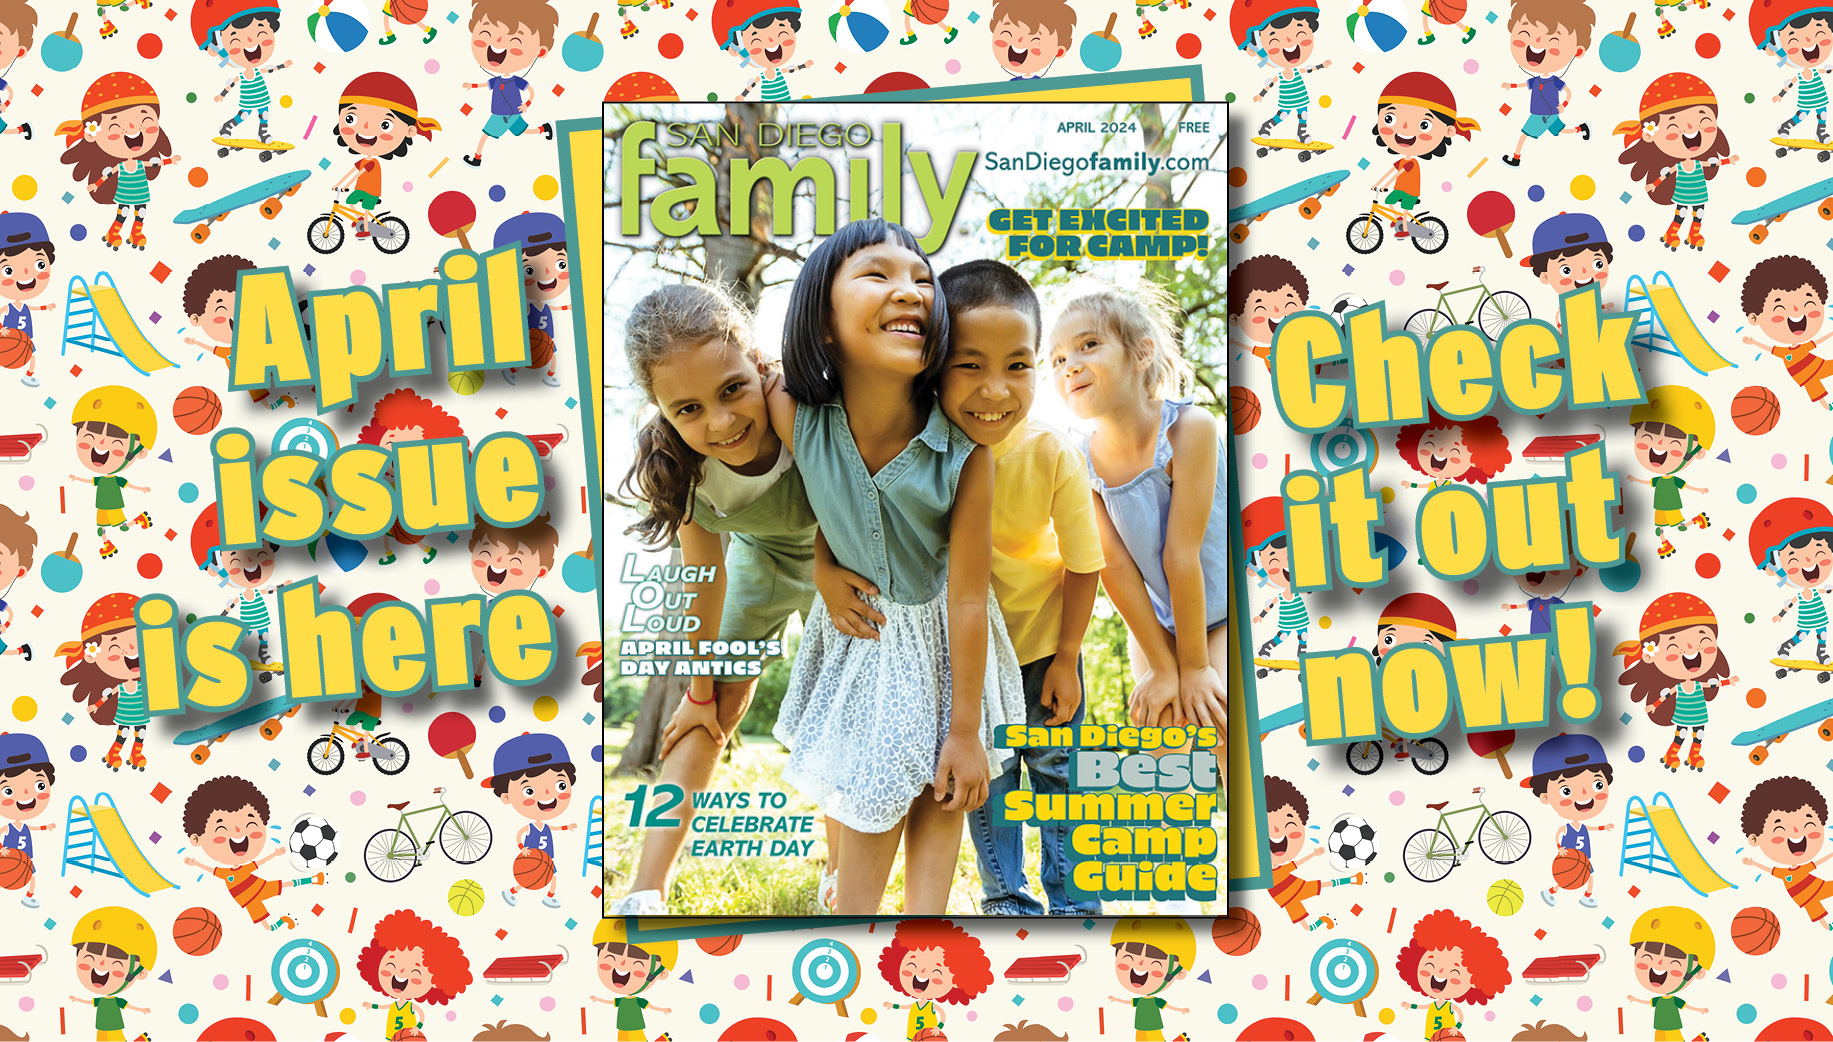 January issue of San Diego Family Magazine